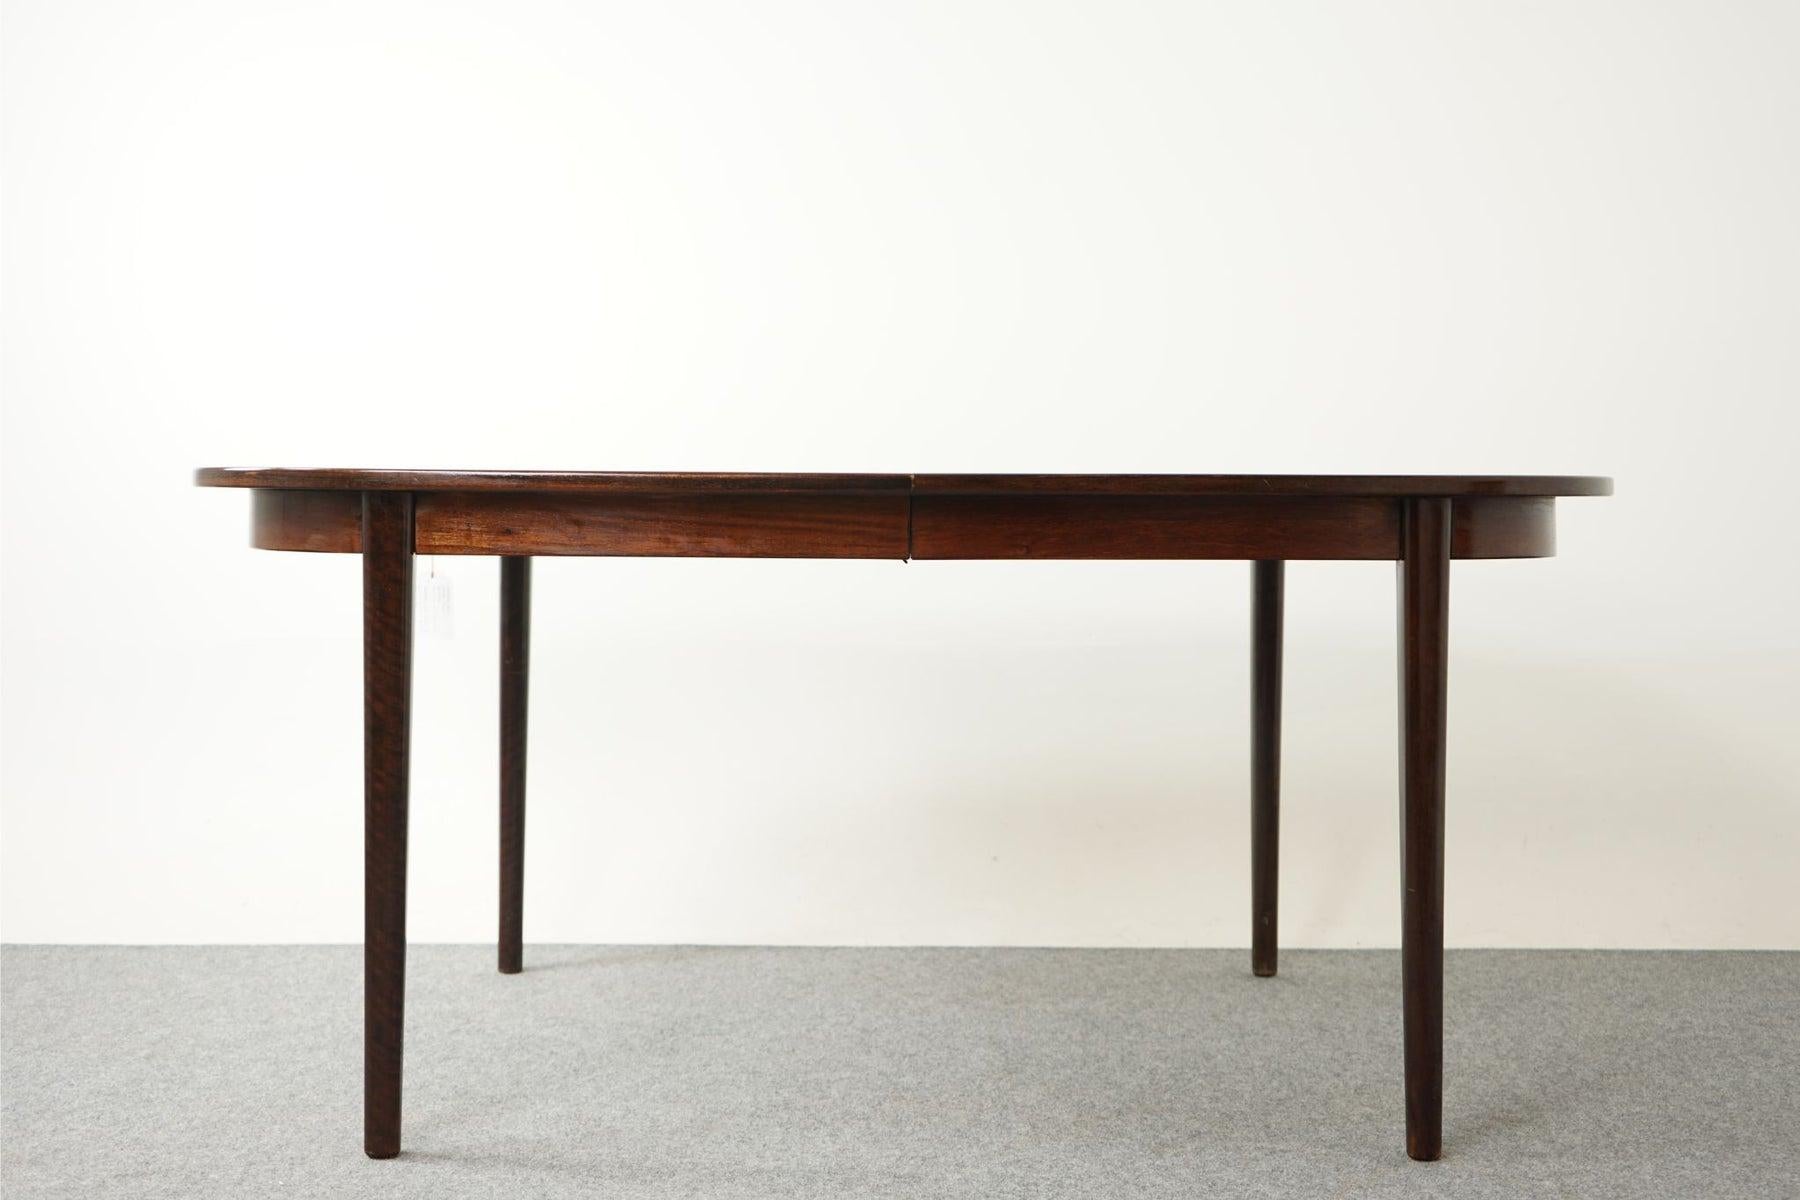 Rosewood Scandinavian dining table, circa 1960. Table top is framed in solid wood edge trim while the center panels feature highly figured veneer with book-matched grain. Expandable design makes this the perfect table for modern compact living